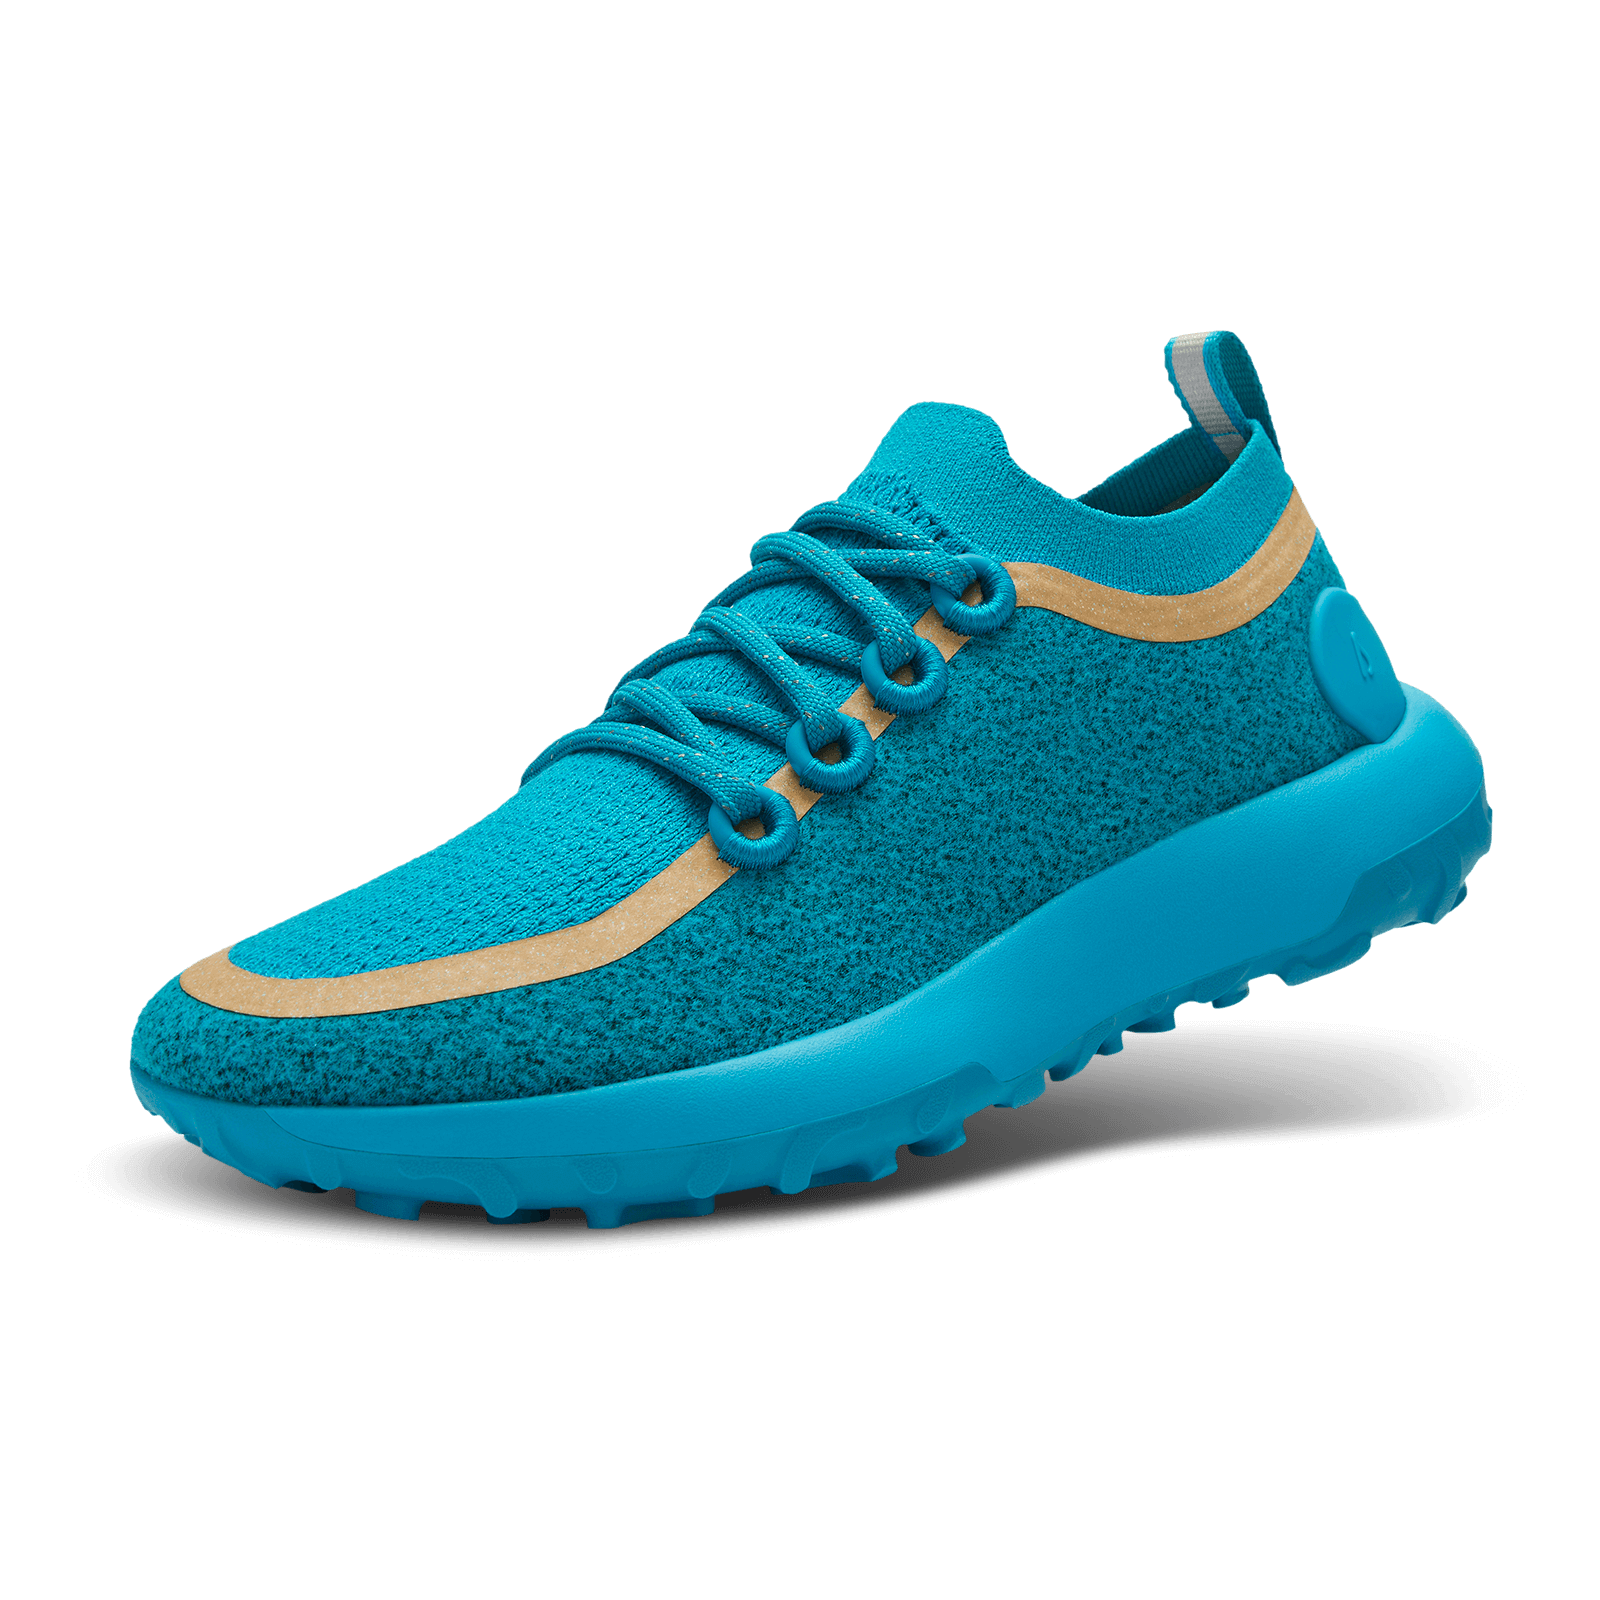 Men's Trail Runner SWT Mizzles - Thrive Teal (Thrive Teal Sole)